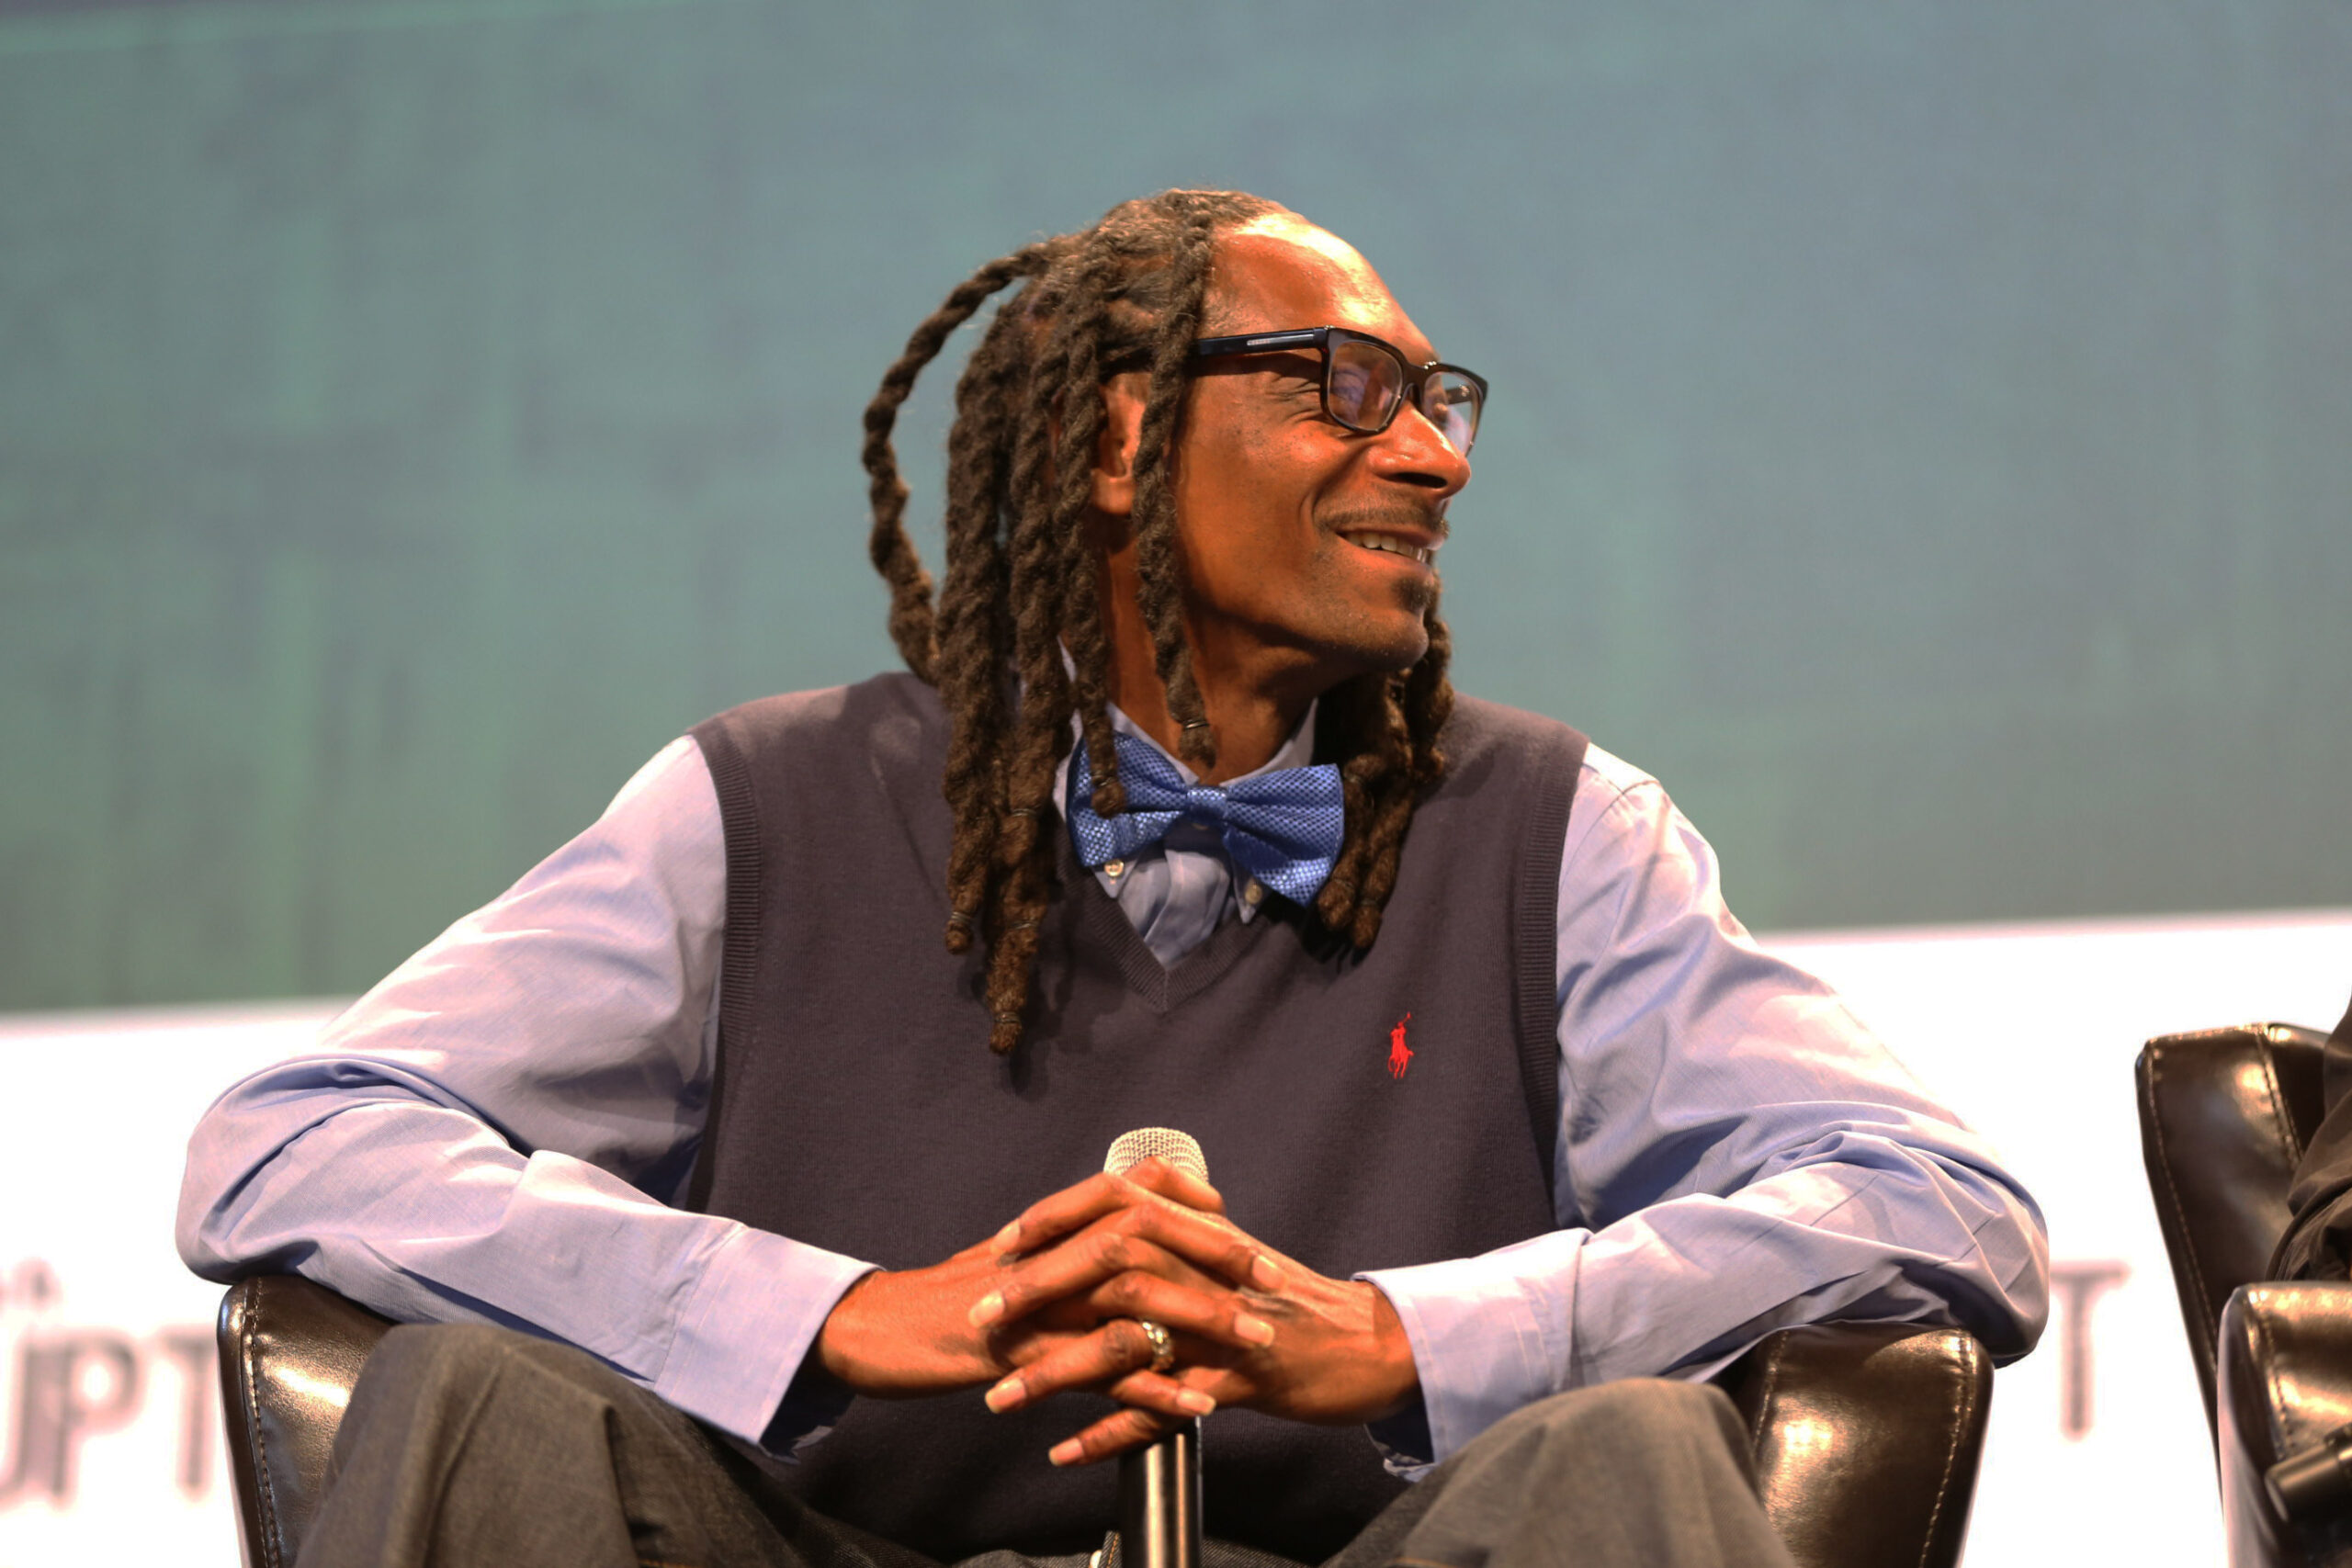 Snoop Dogg's Other Ventures and Endeavors